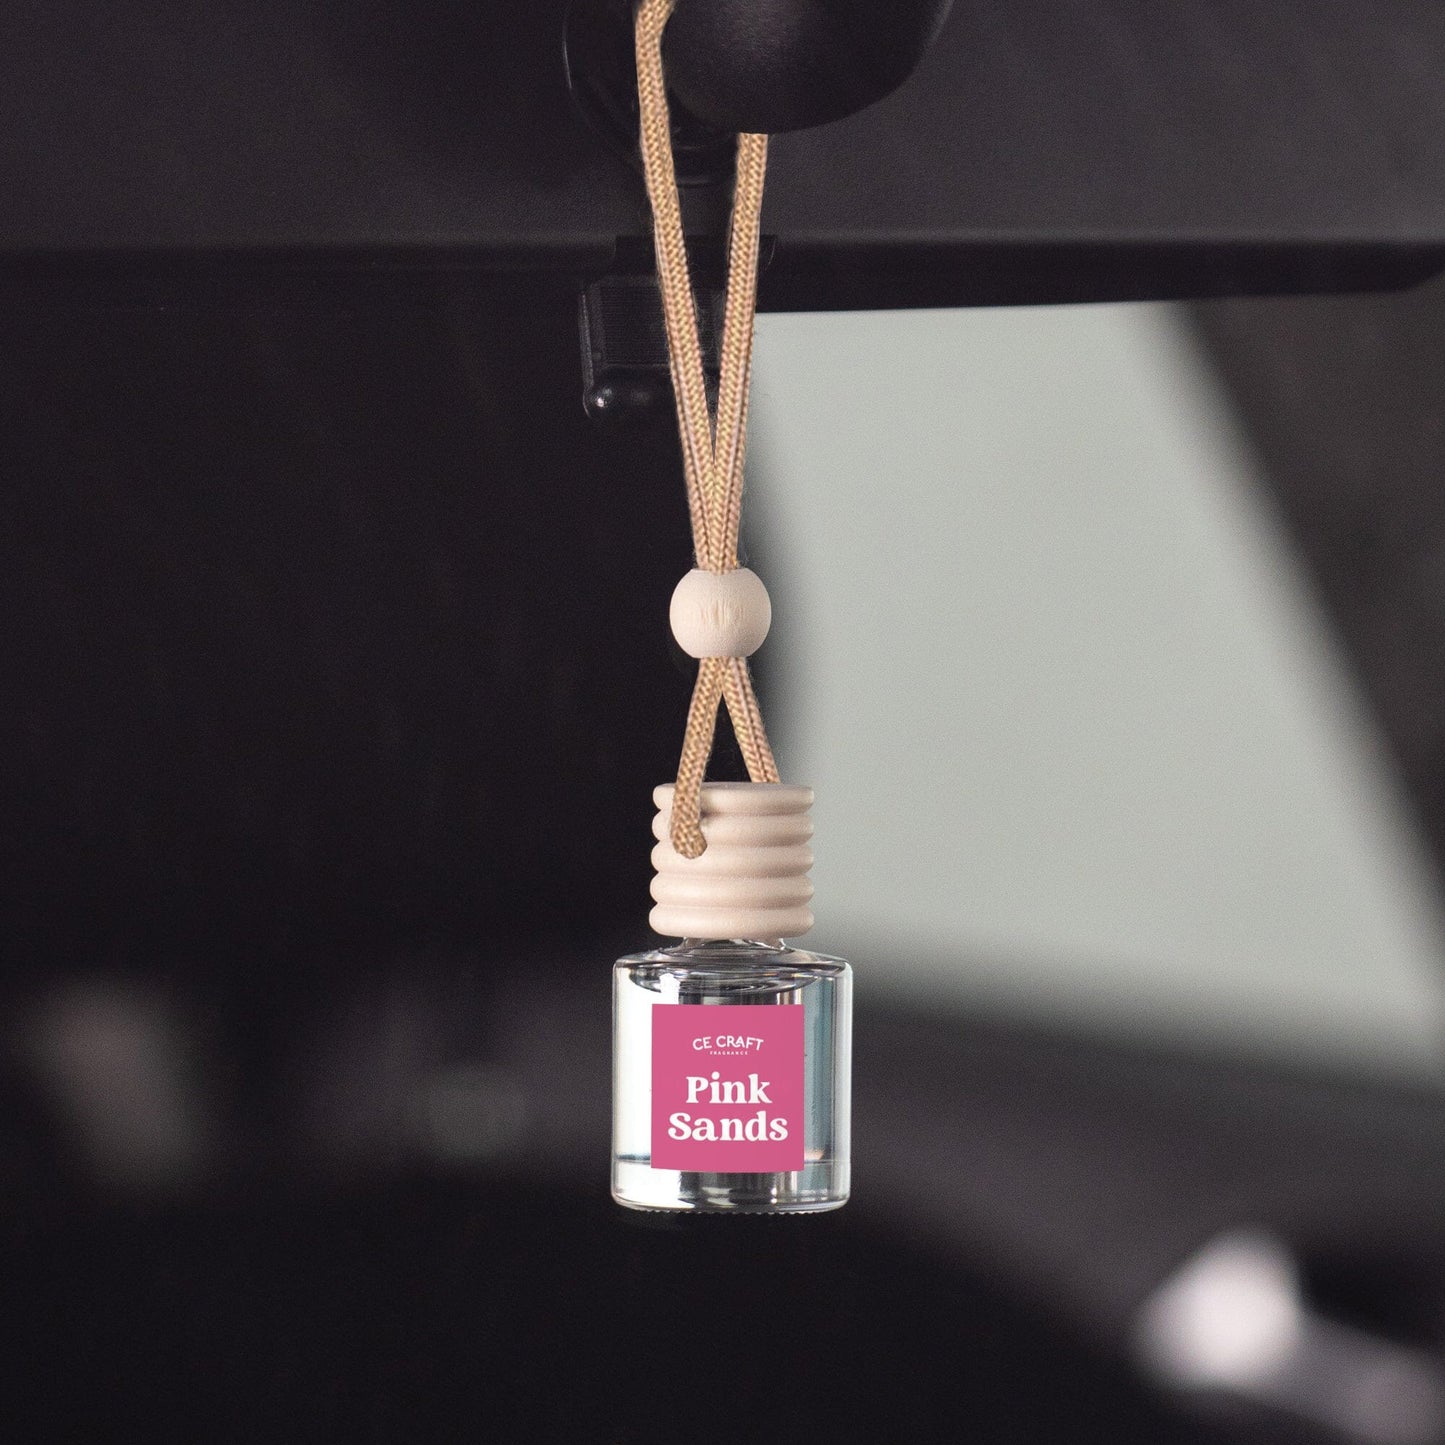 Scented Car Freshener - Car Air Freshener Diffuser - Last 60+ Days Vehicle Air Fresheners CE Craft Pink Sands 